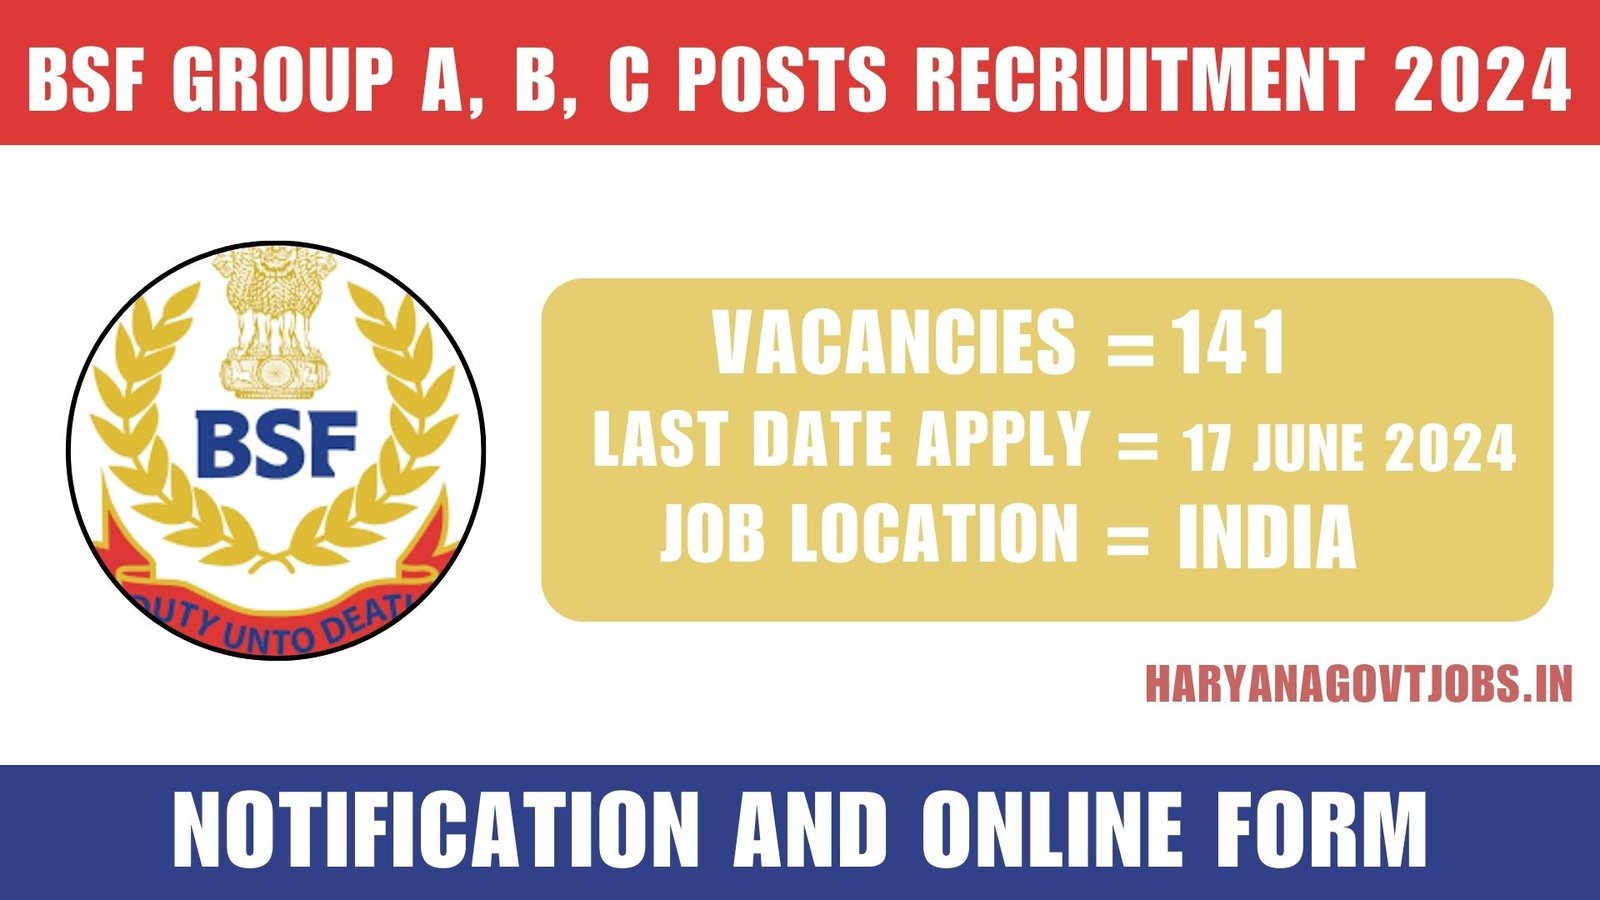 BSF Group A, B, C Paramedical, Workshop, and Veterinary Staff Recruitment 2024 Notification and Online Form